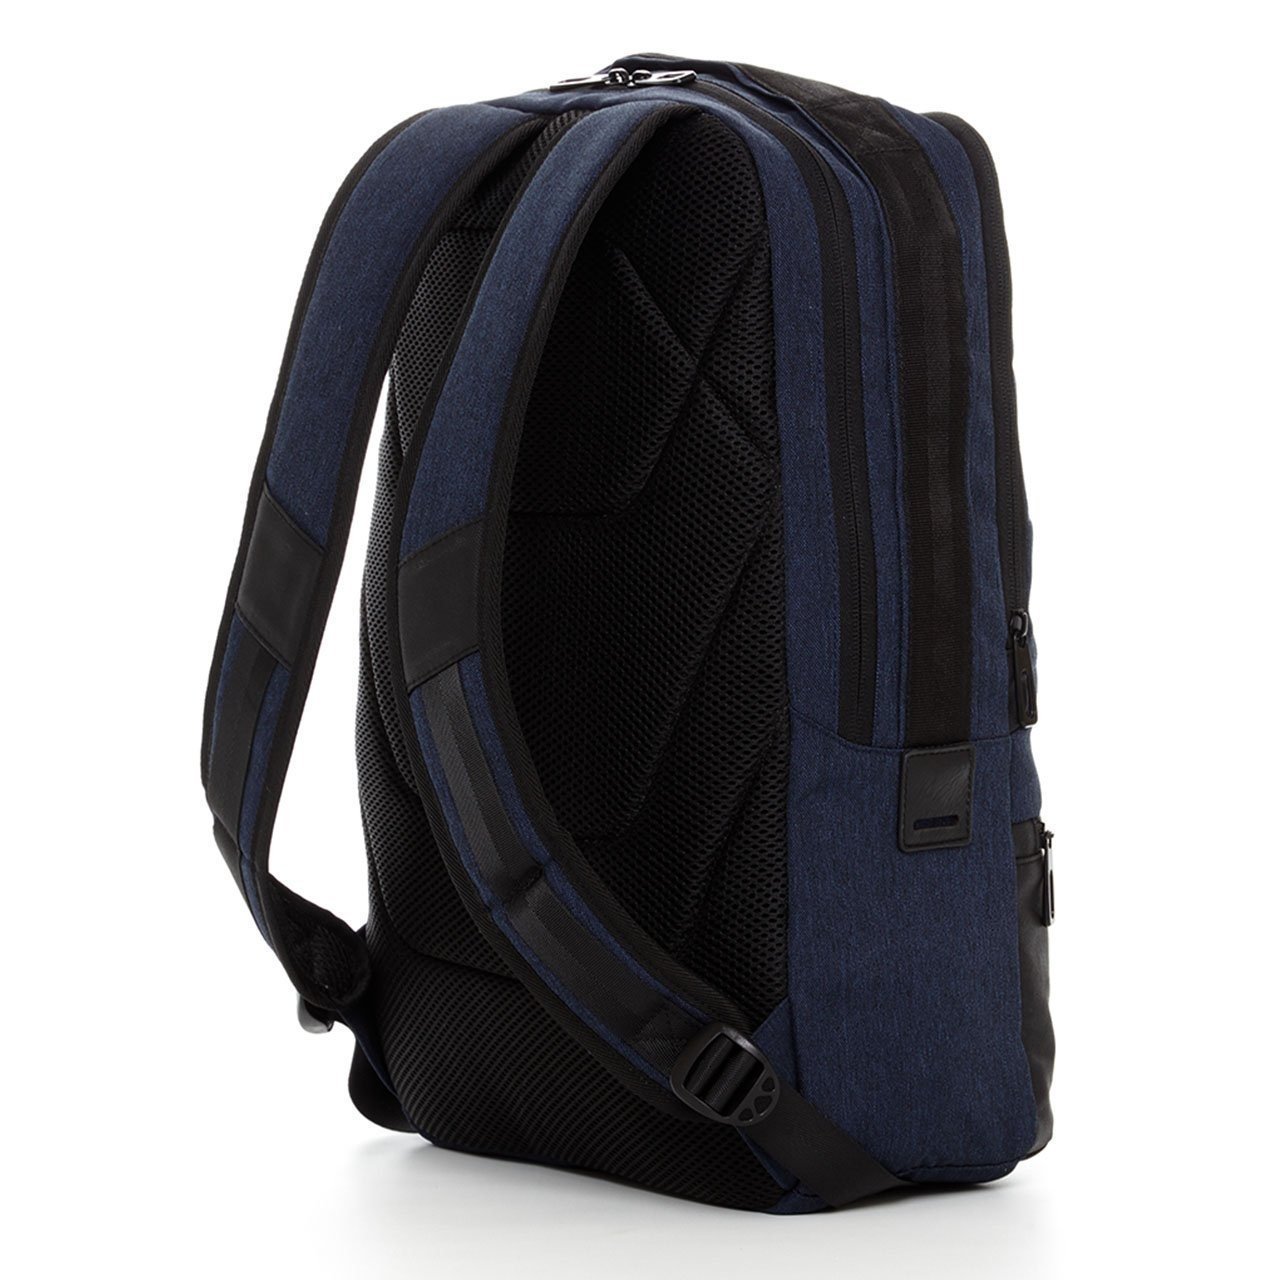 Hank All Purpose Backpack by PX Clothing - Benn Burry